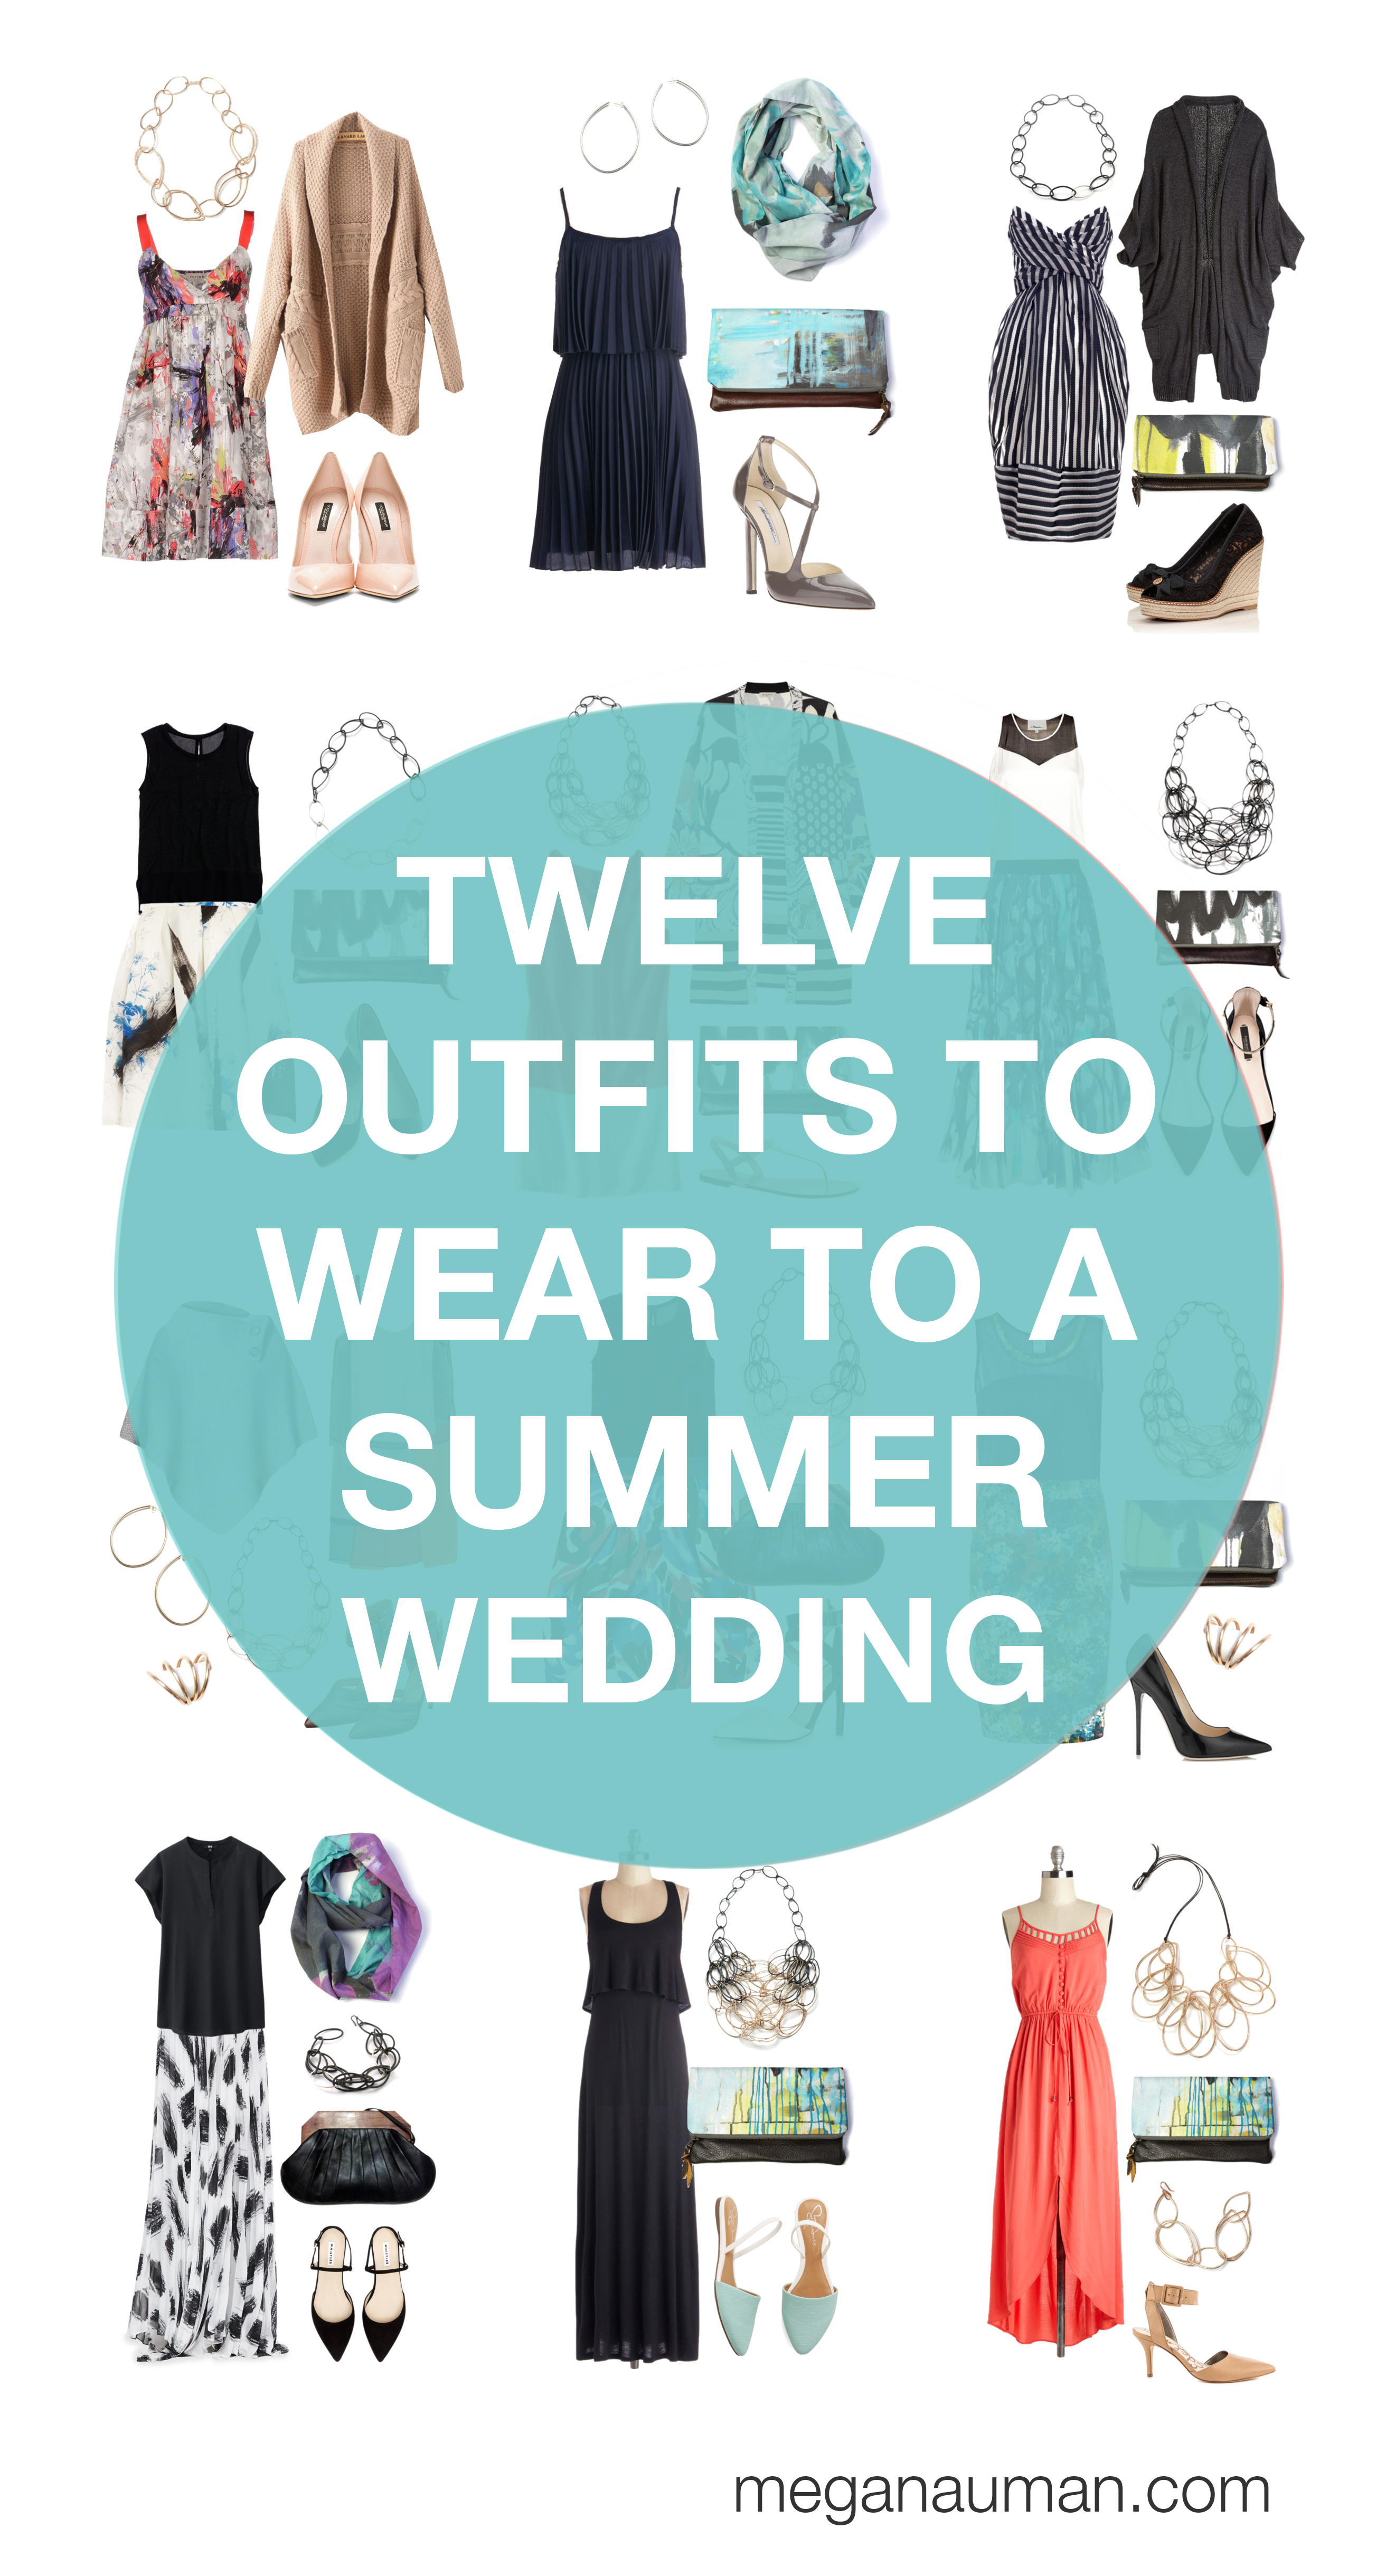 what to wear to a summer wedding: 12 outfit ideas via megan auman